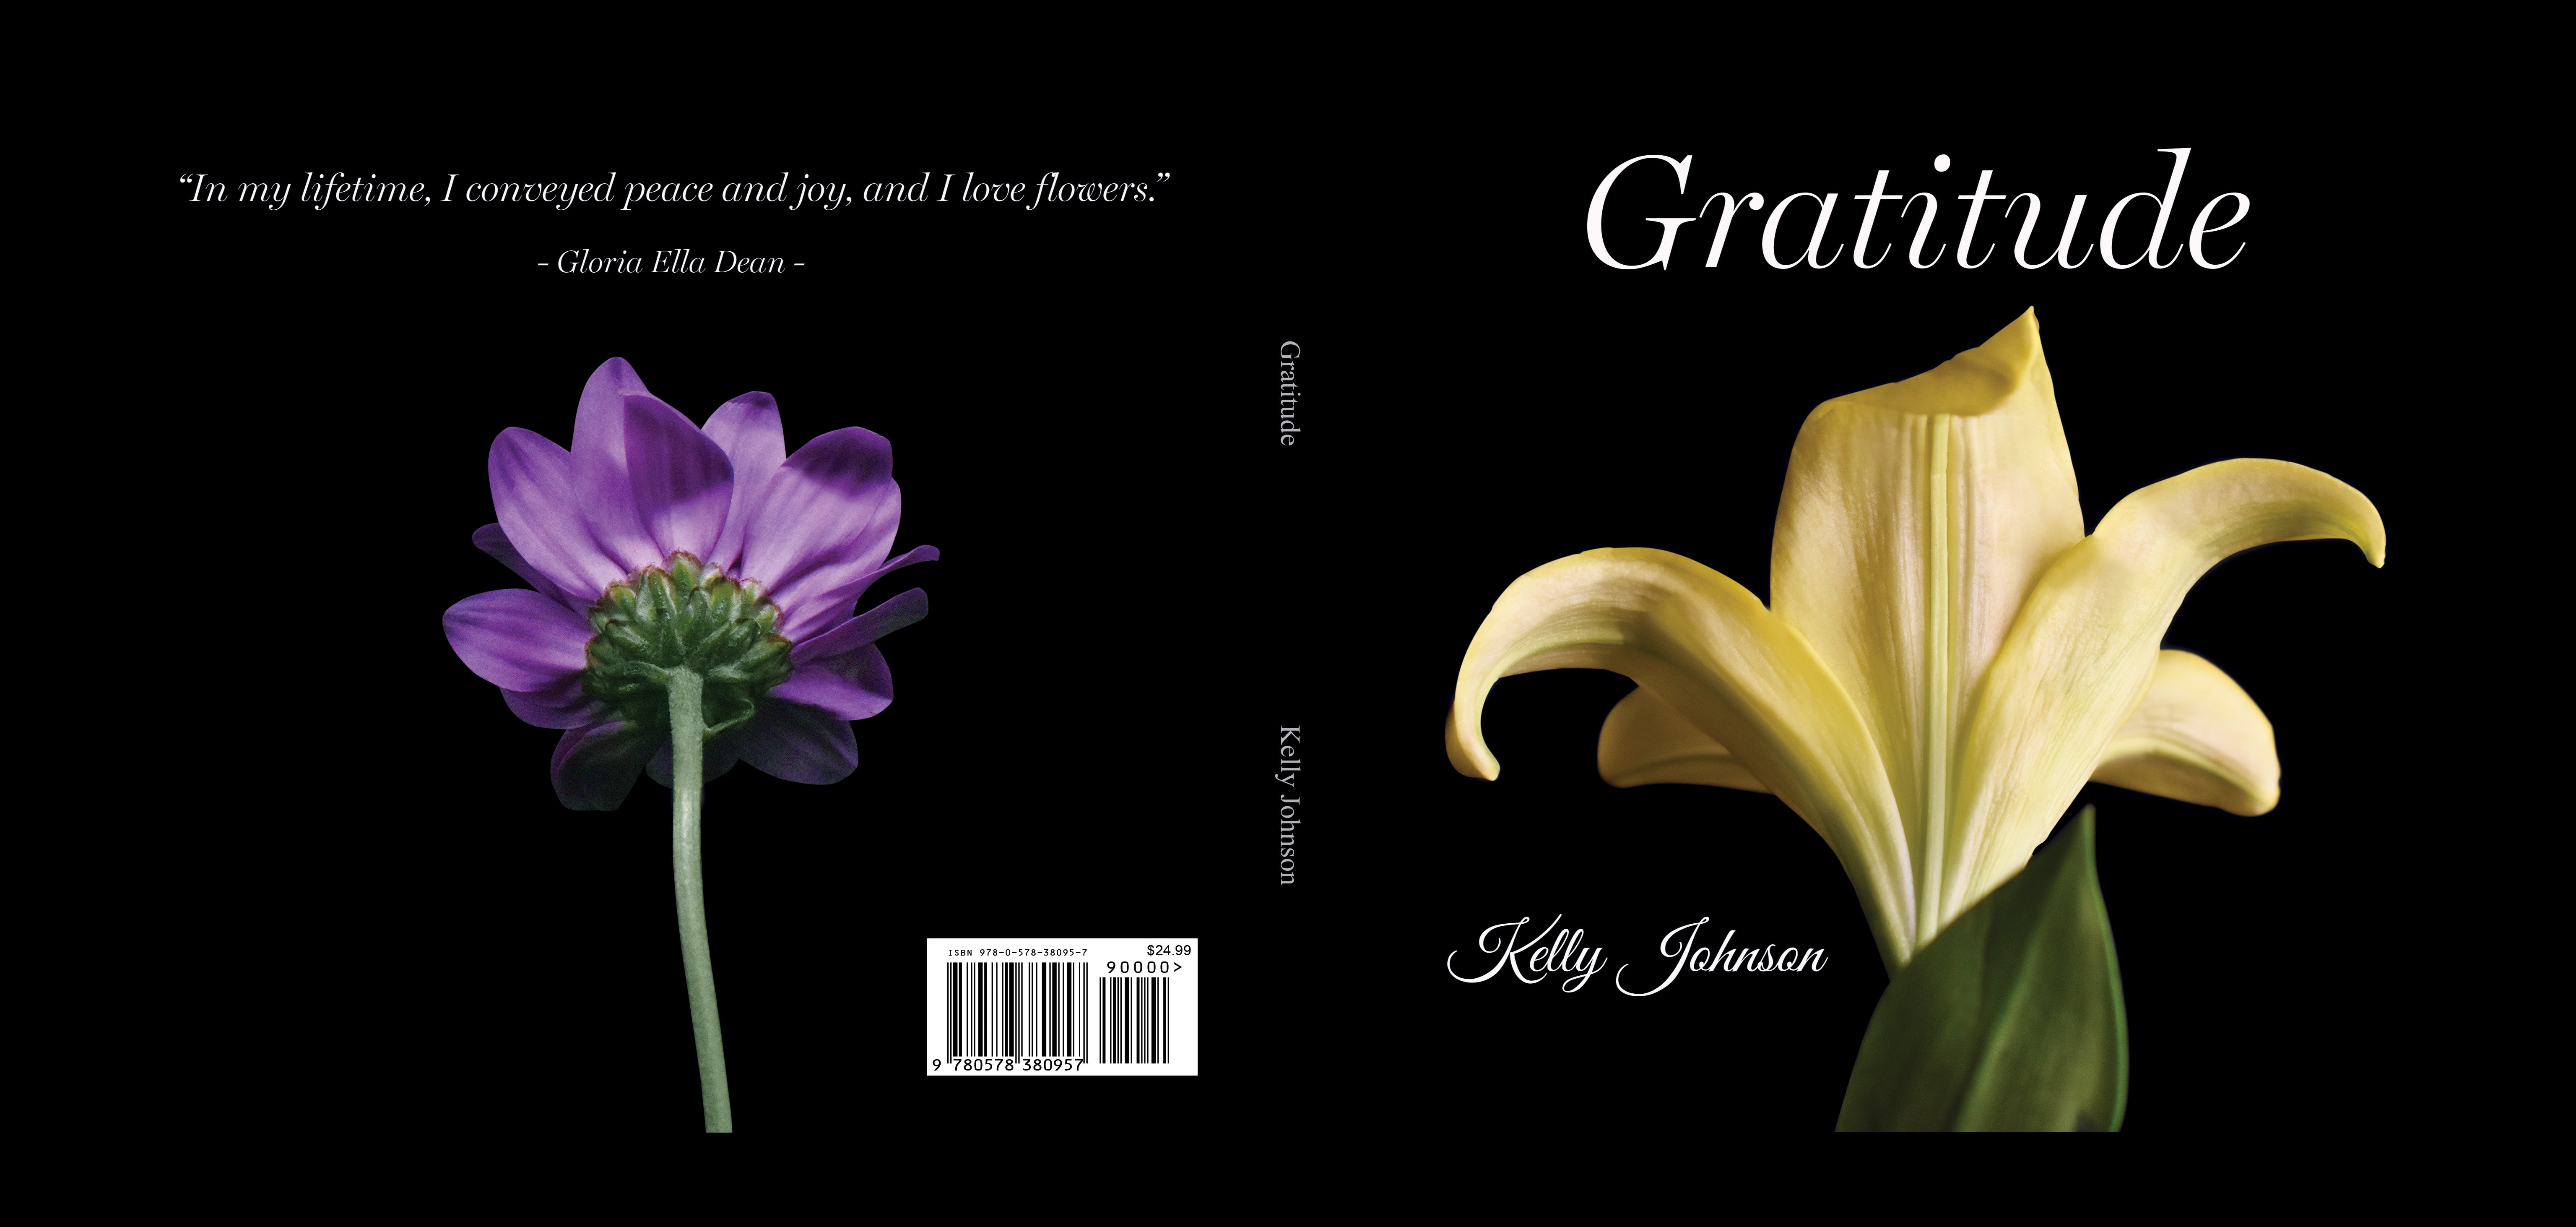 Gratitude book cover front and back